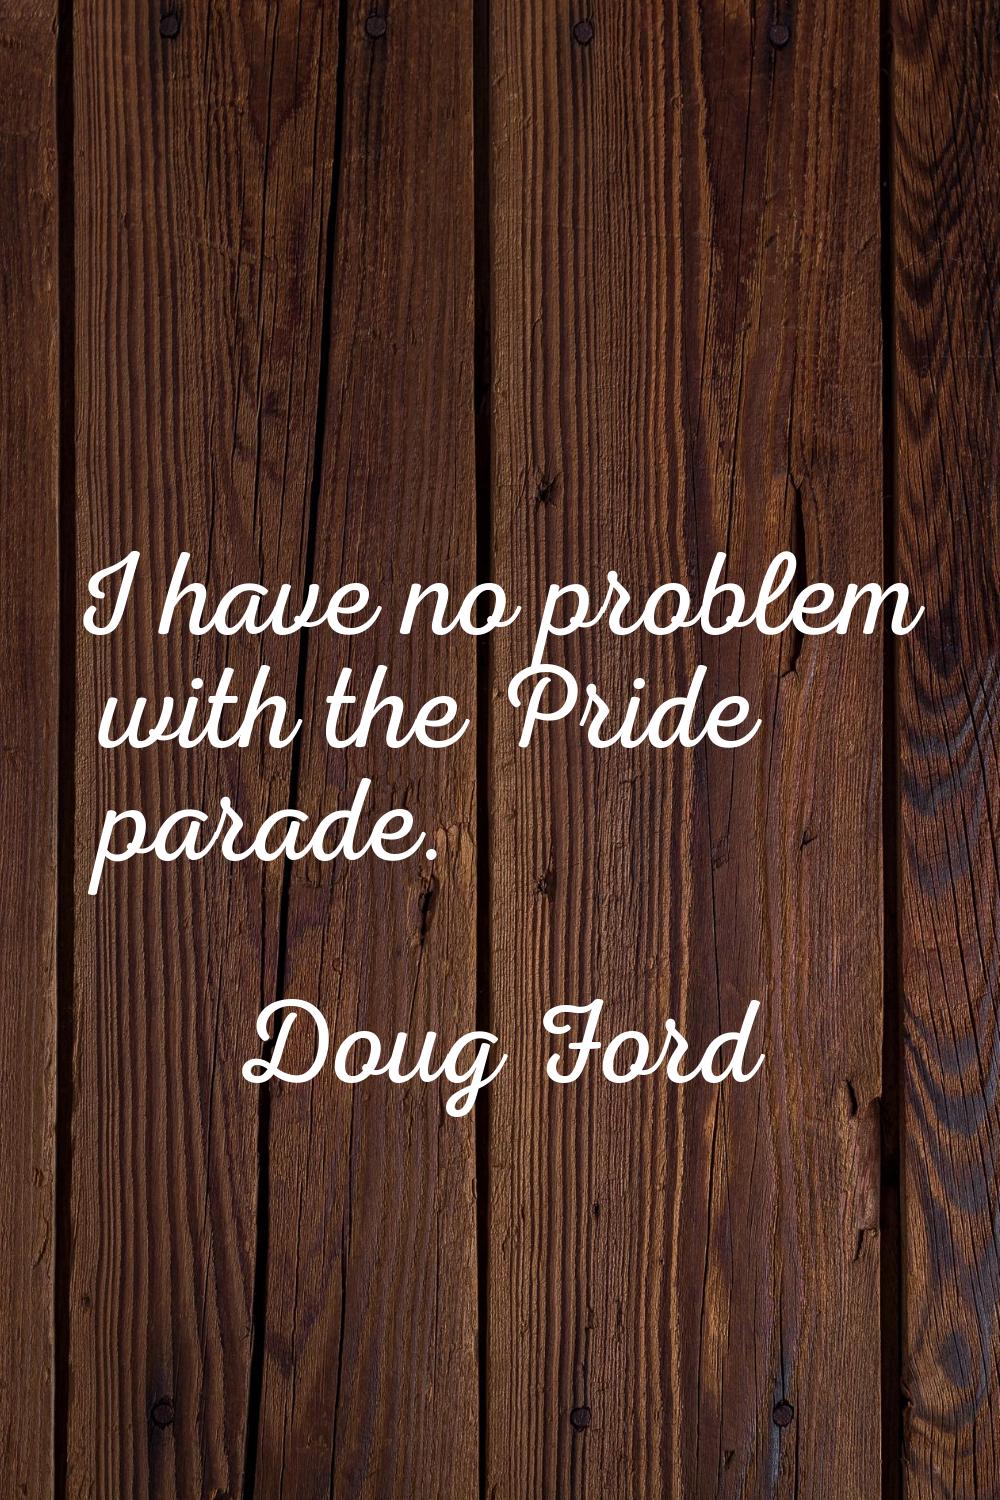 I have no problem with the Pride parade.